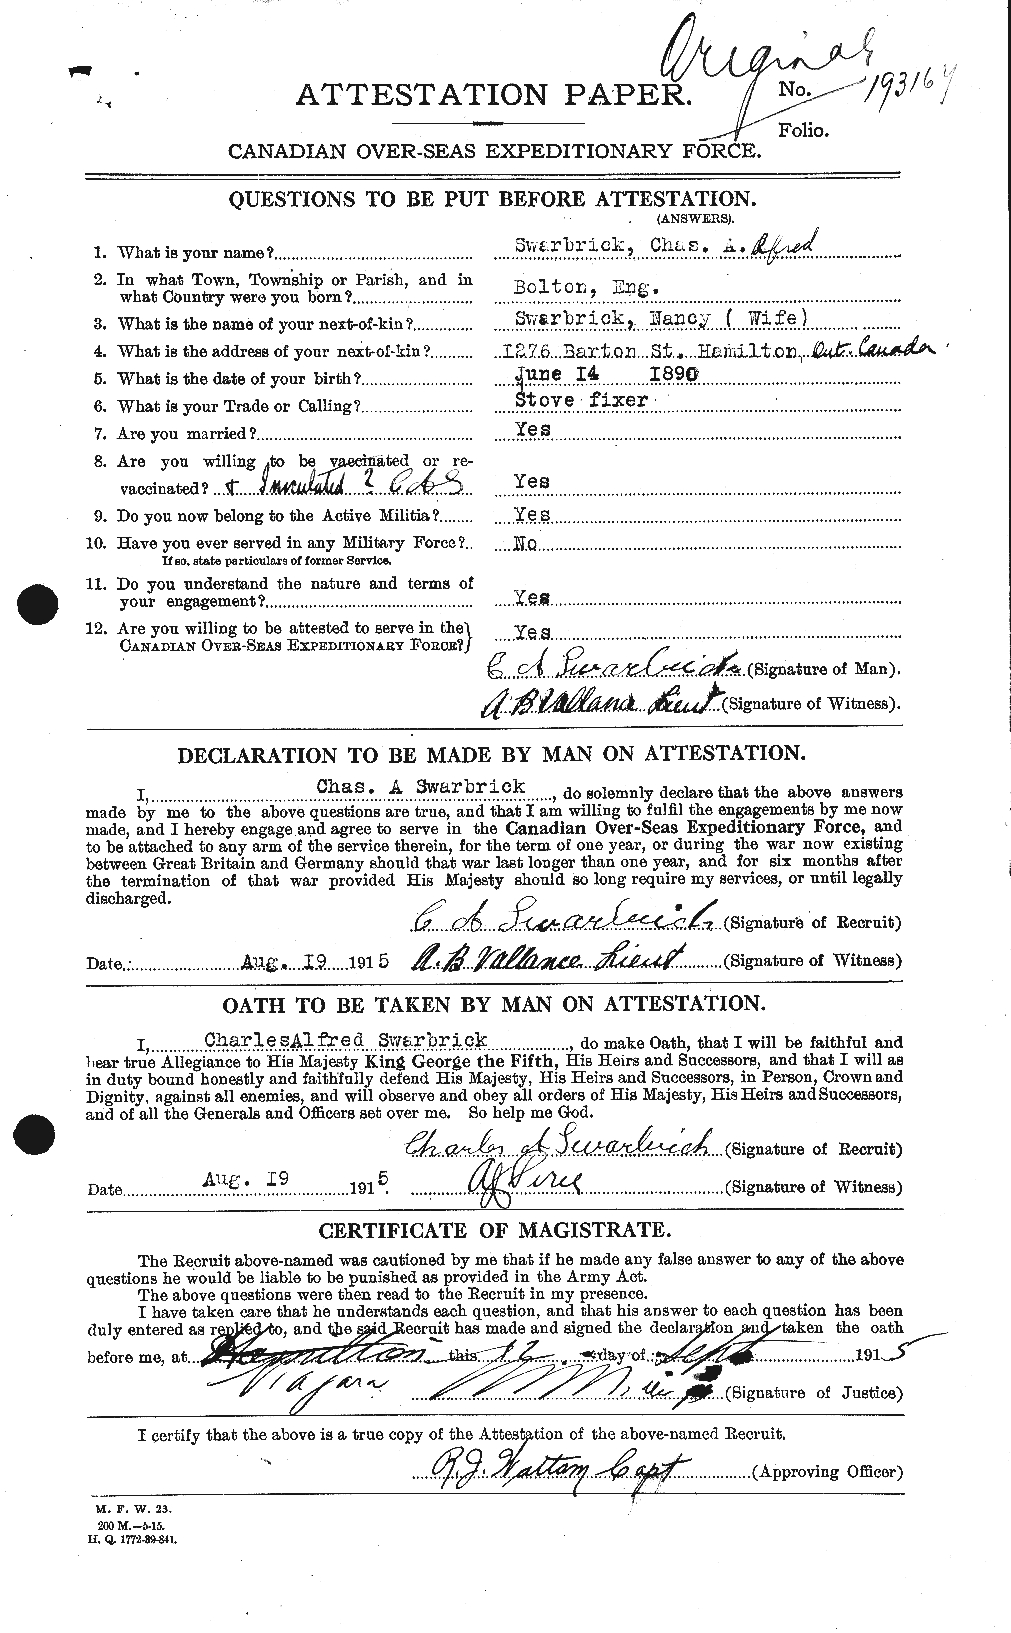 Personnel Records of the First World War - CEF 083838a